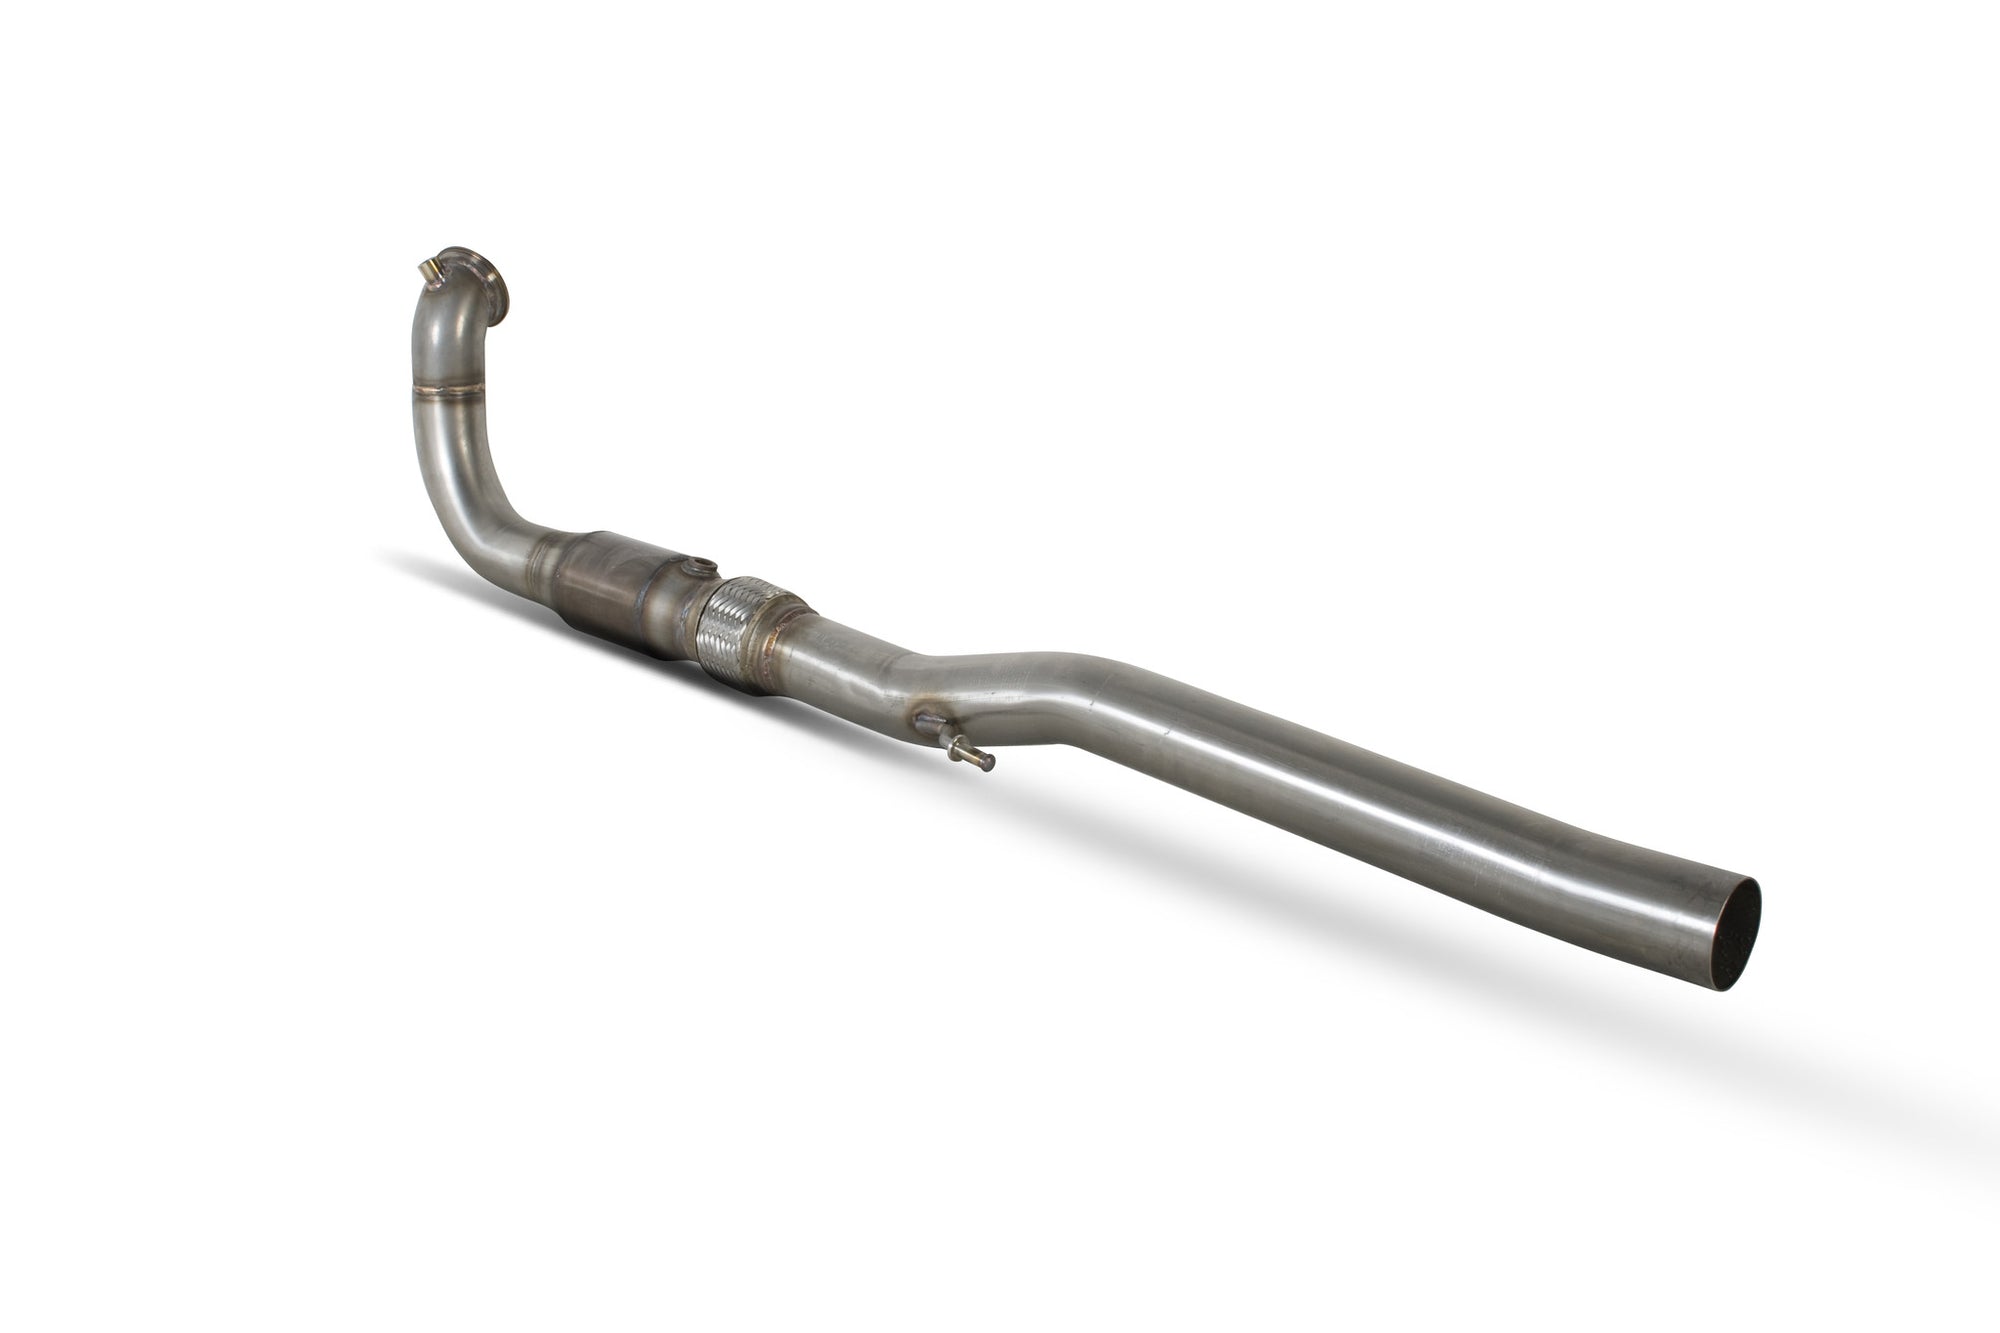 Vauxhall Corsa D VXR/Nurburgring  Downpipe with high flow sports catalyst